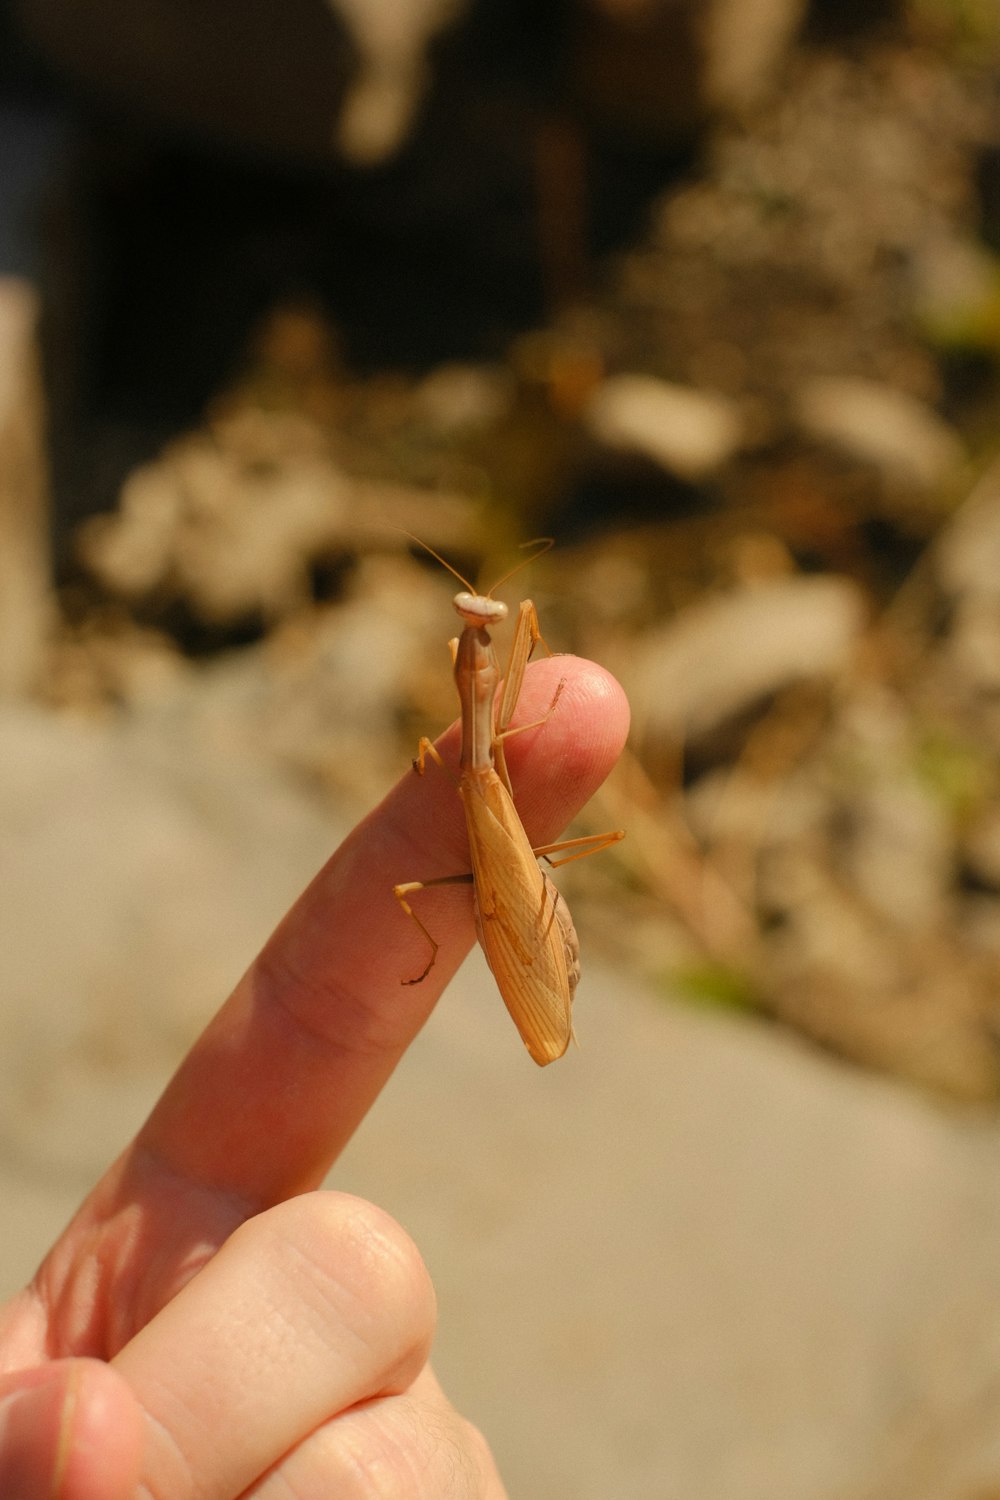 a person holding a small insect in their hand